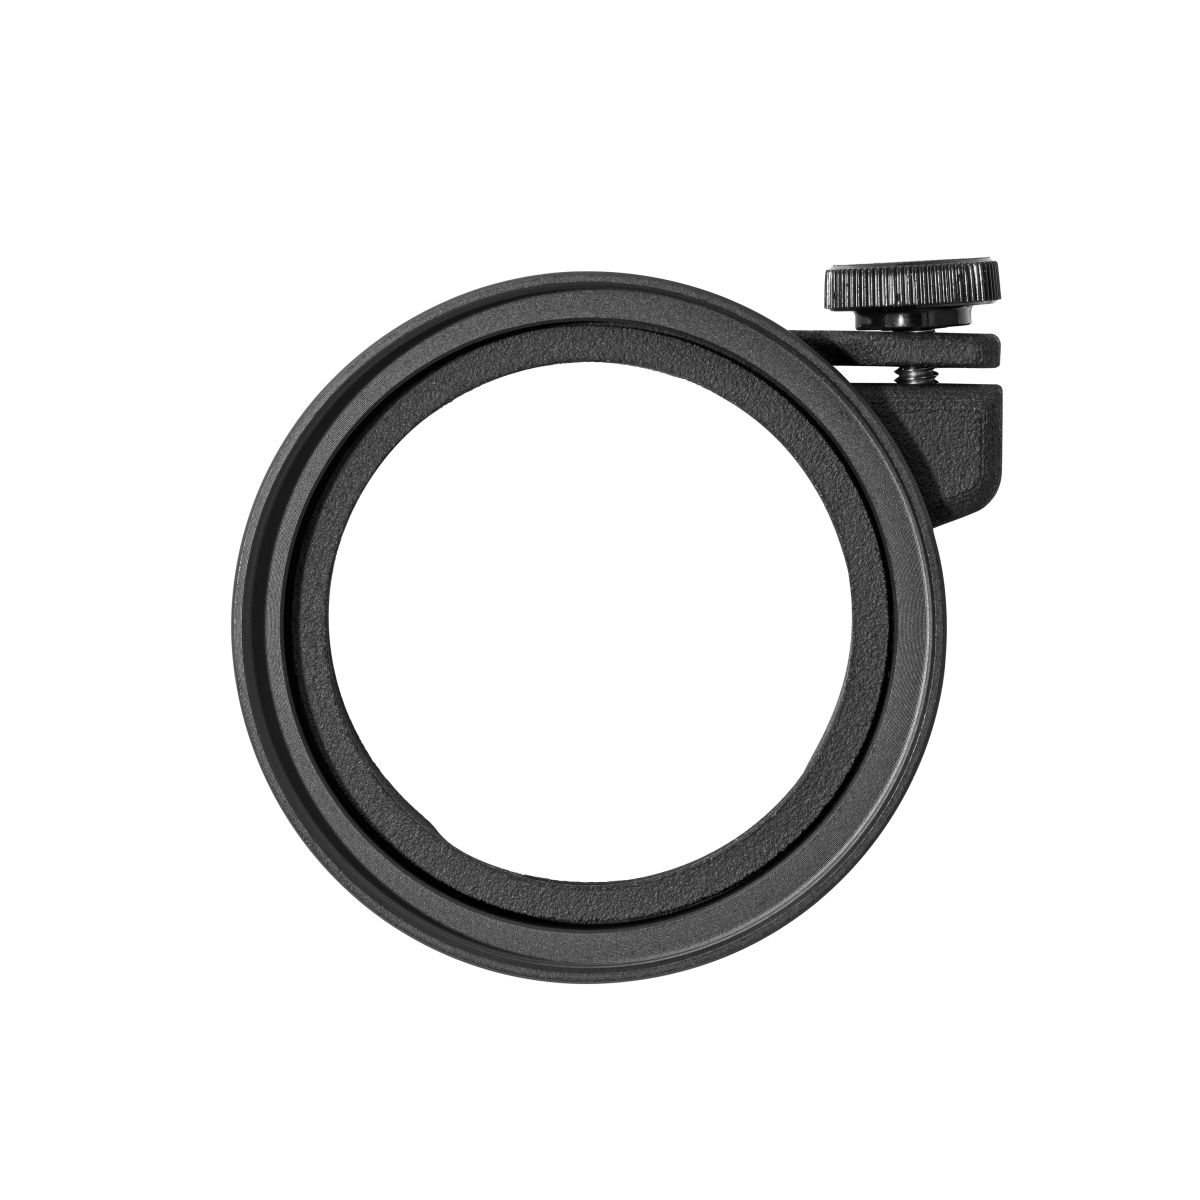 Lensbaby Edge 35 Filter Adapter